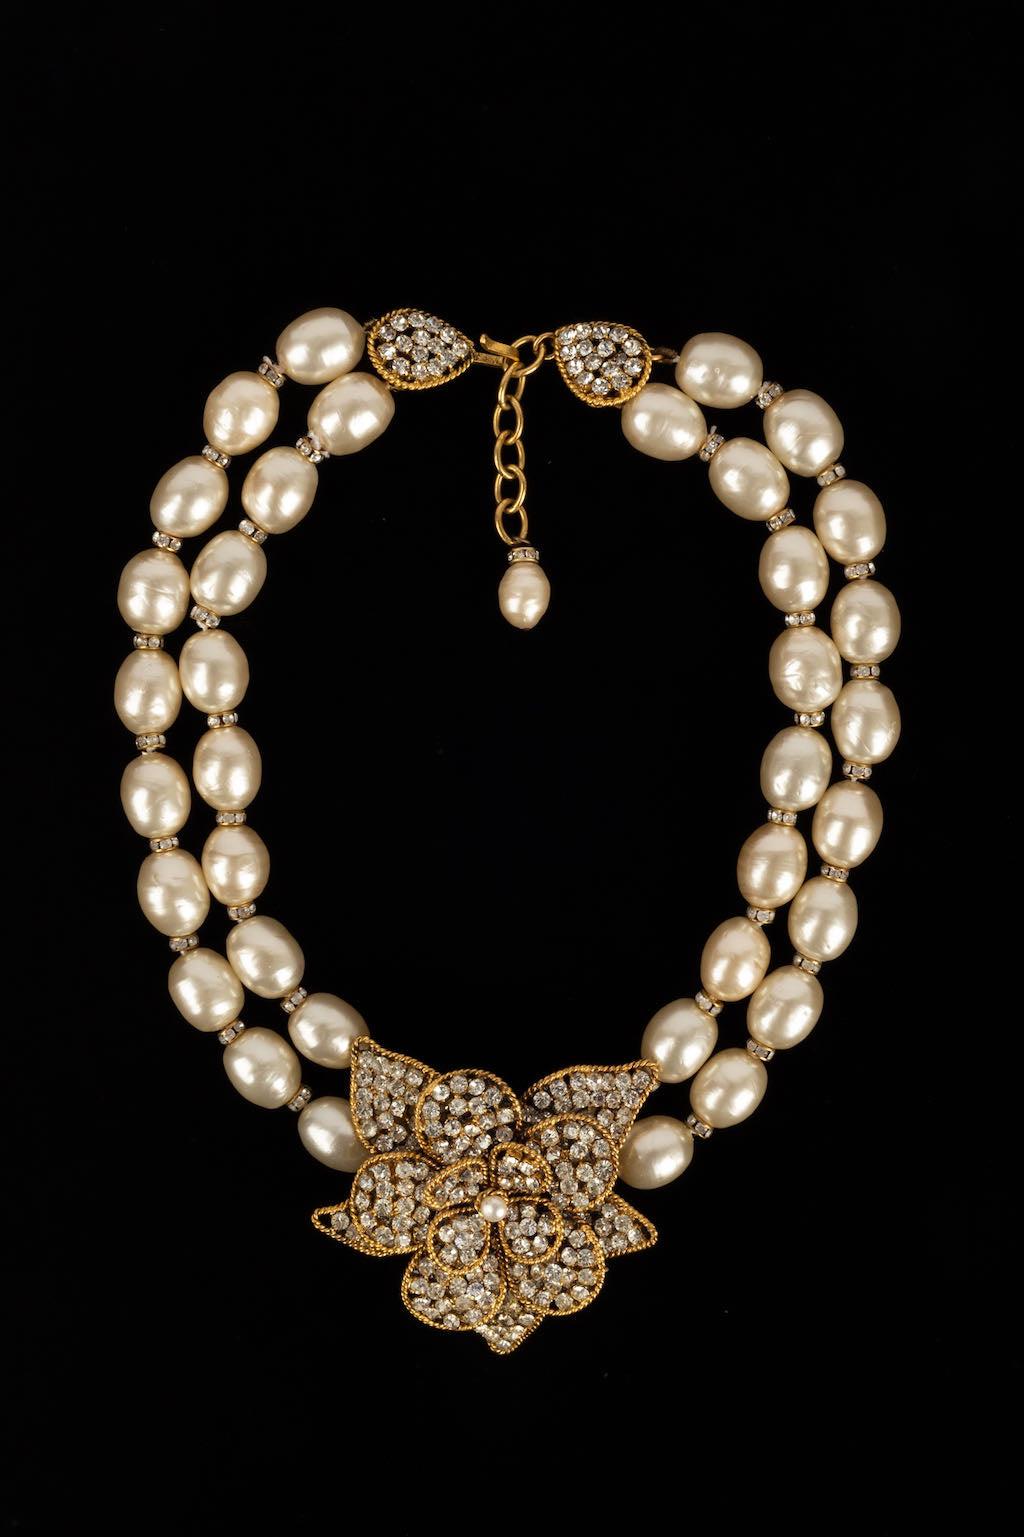 Chanel -(Made in France) Necklace with two rows of pearly pearls and rhinestones holding a golden metal flower paved with rhinestones.

Additional information: 
Dimensions: Length: 41 cm - Height: 6 cm
Condition: Very good condition
Seller Ref